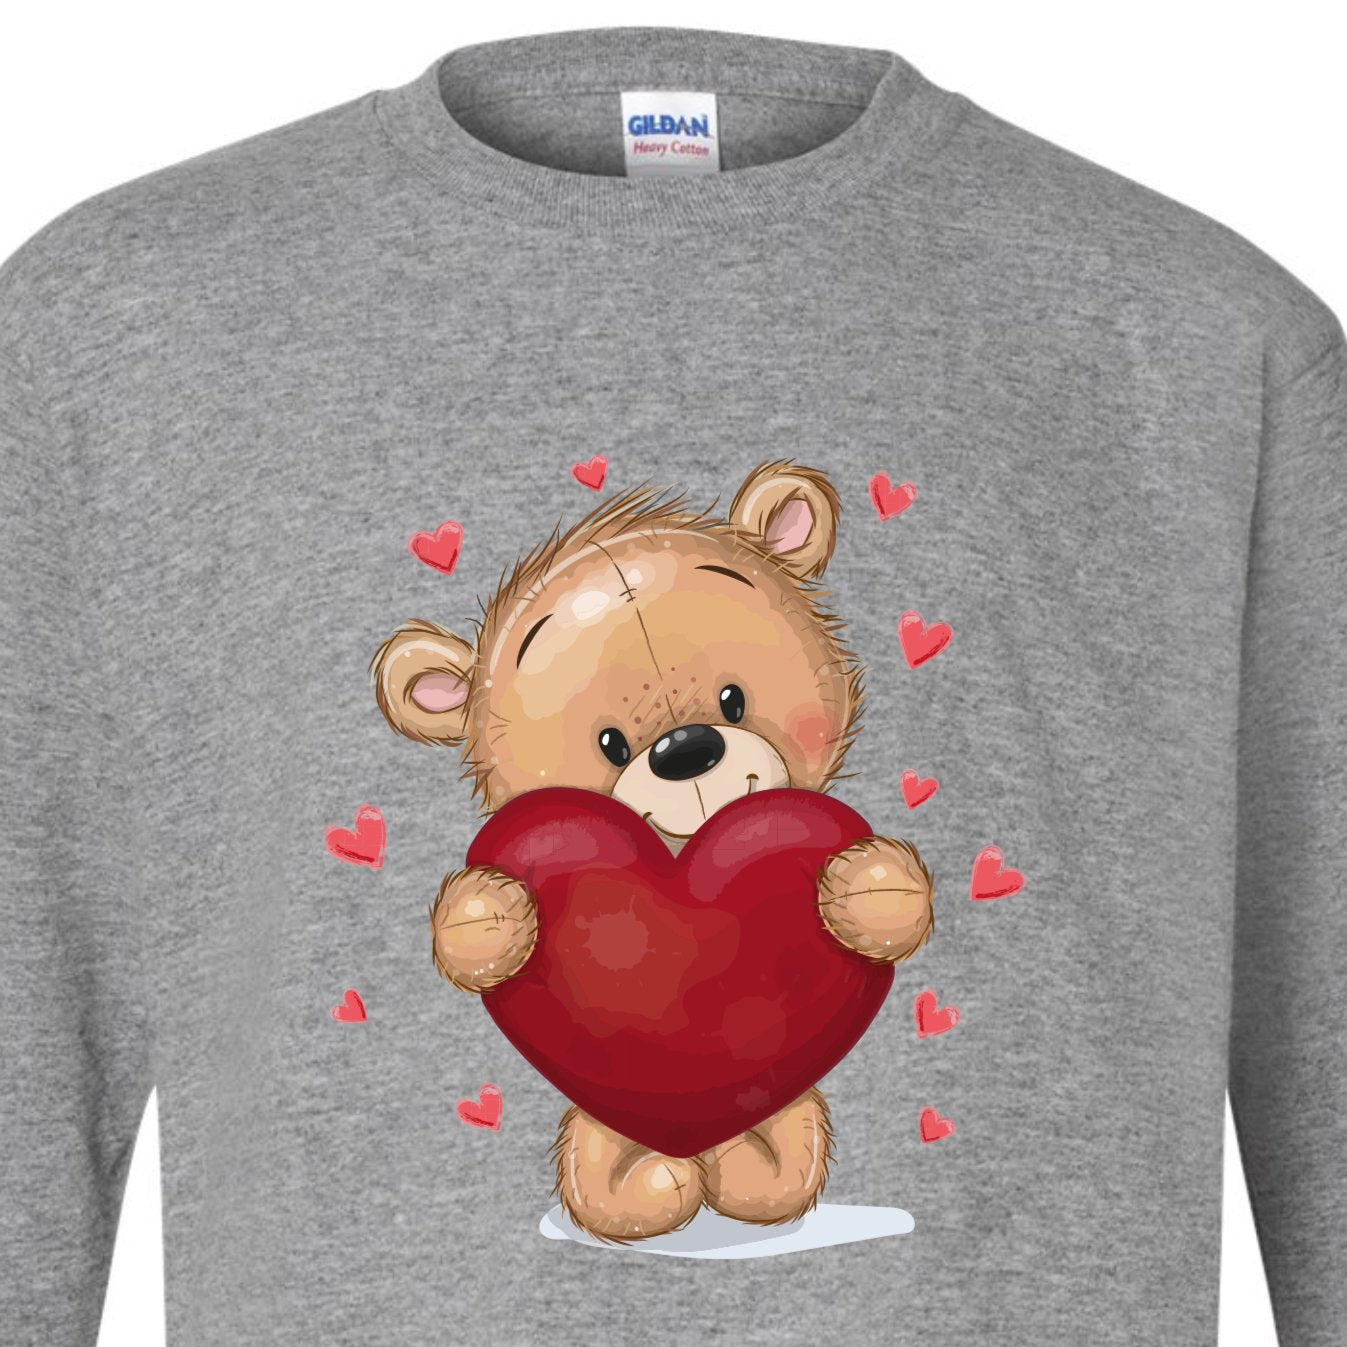 Valentine Heart Teddy Bear Long Sleeve T Shirt (Infant, Toddler, or Youth) - SBS T Shop